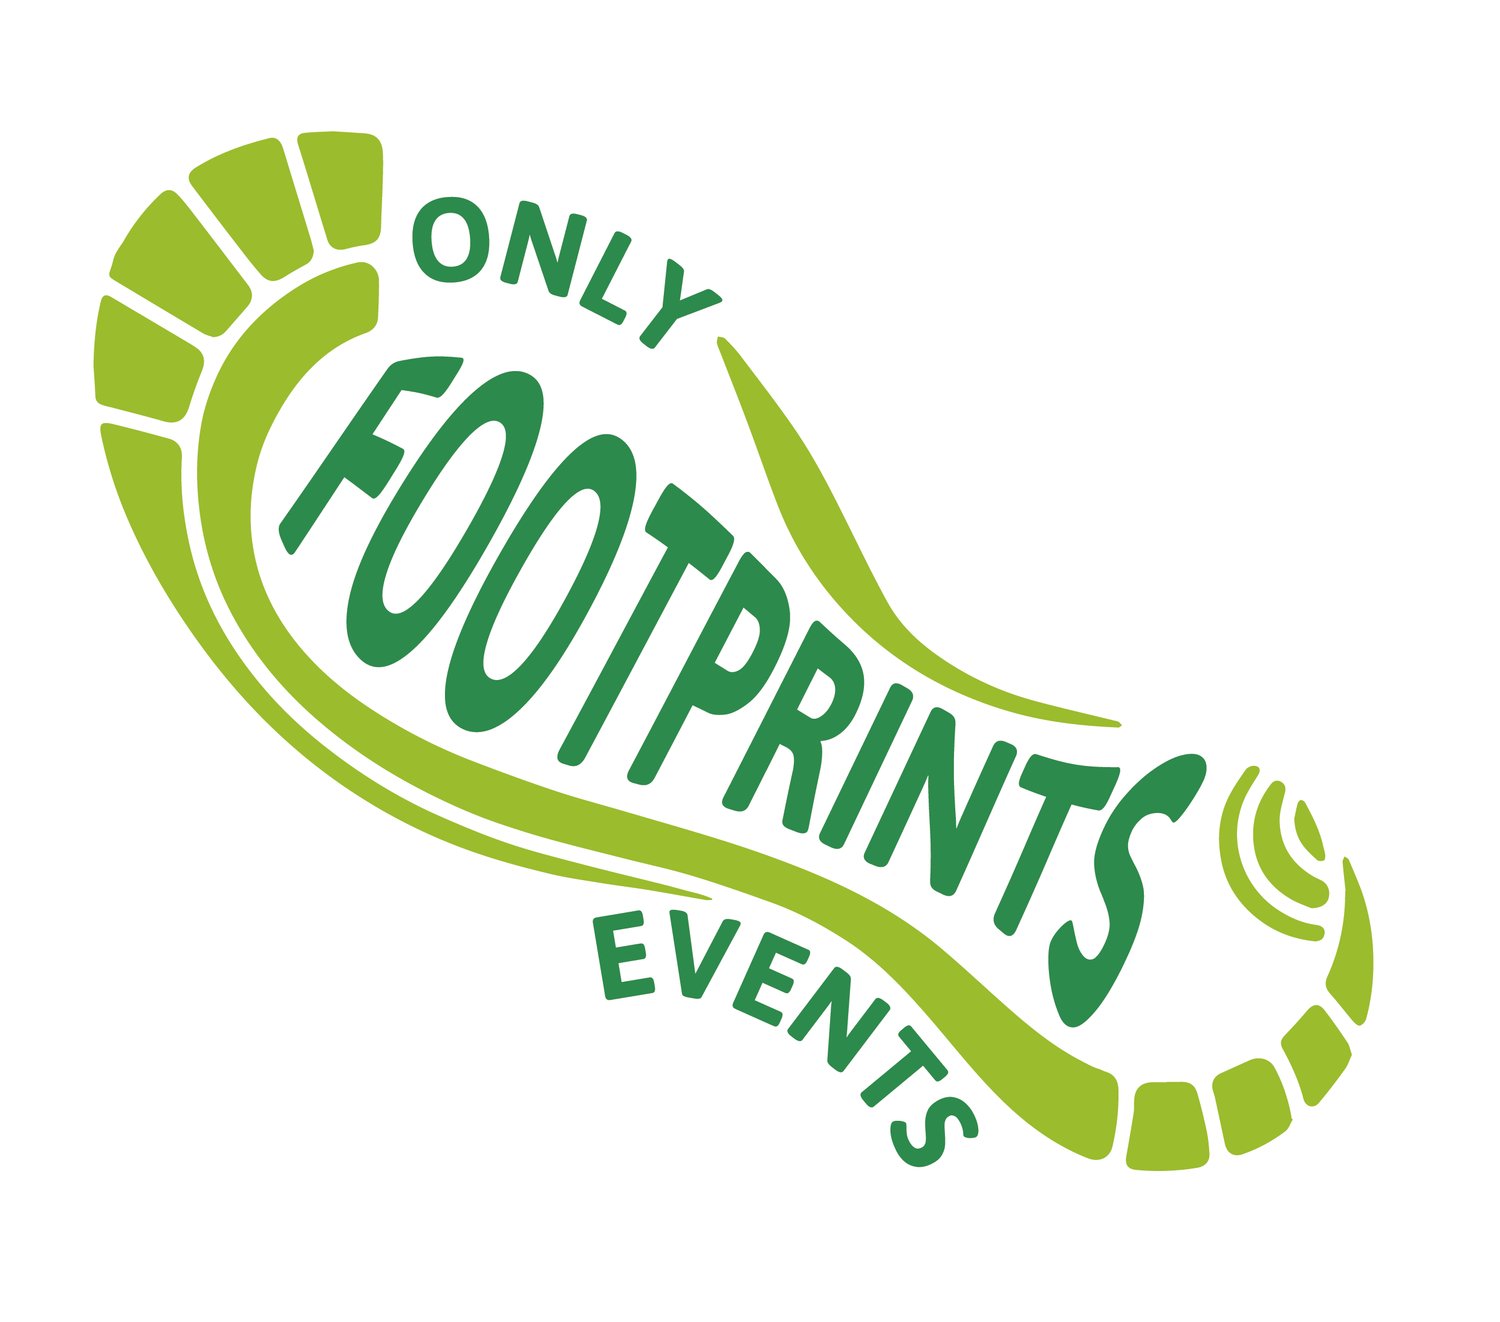 Only Footprints Events